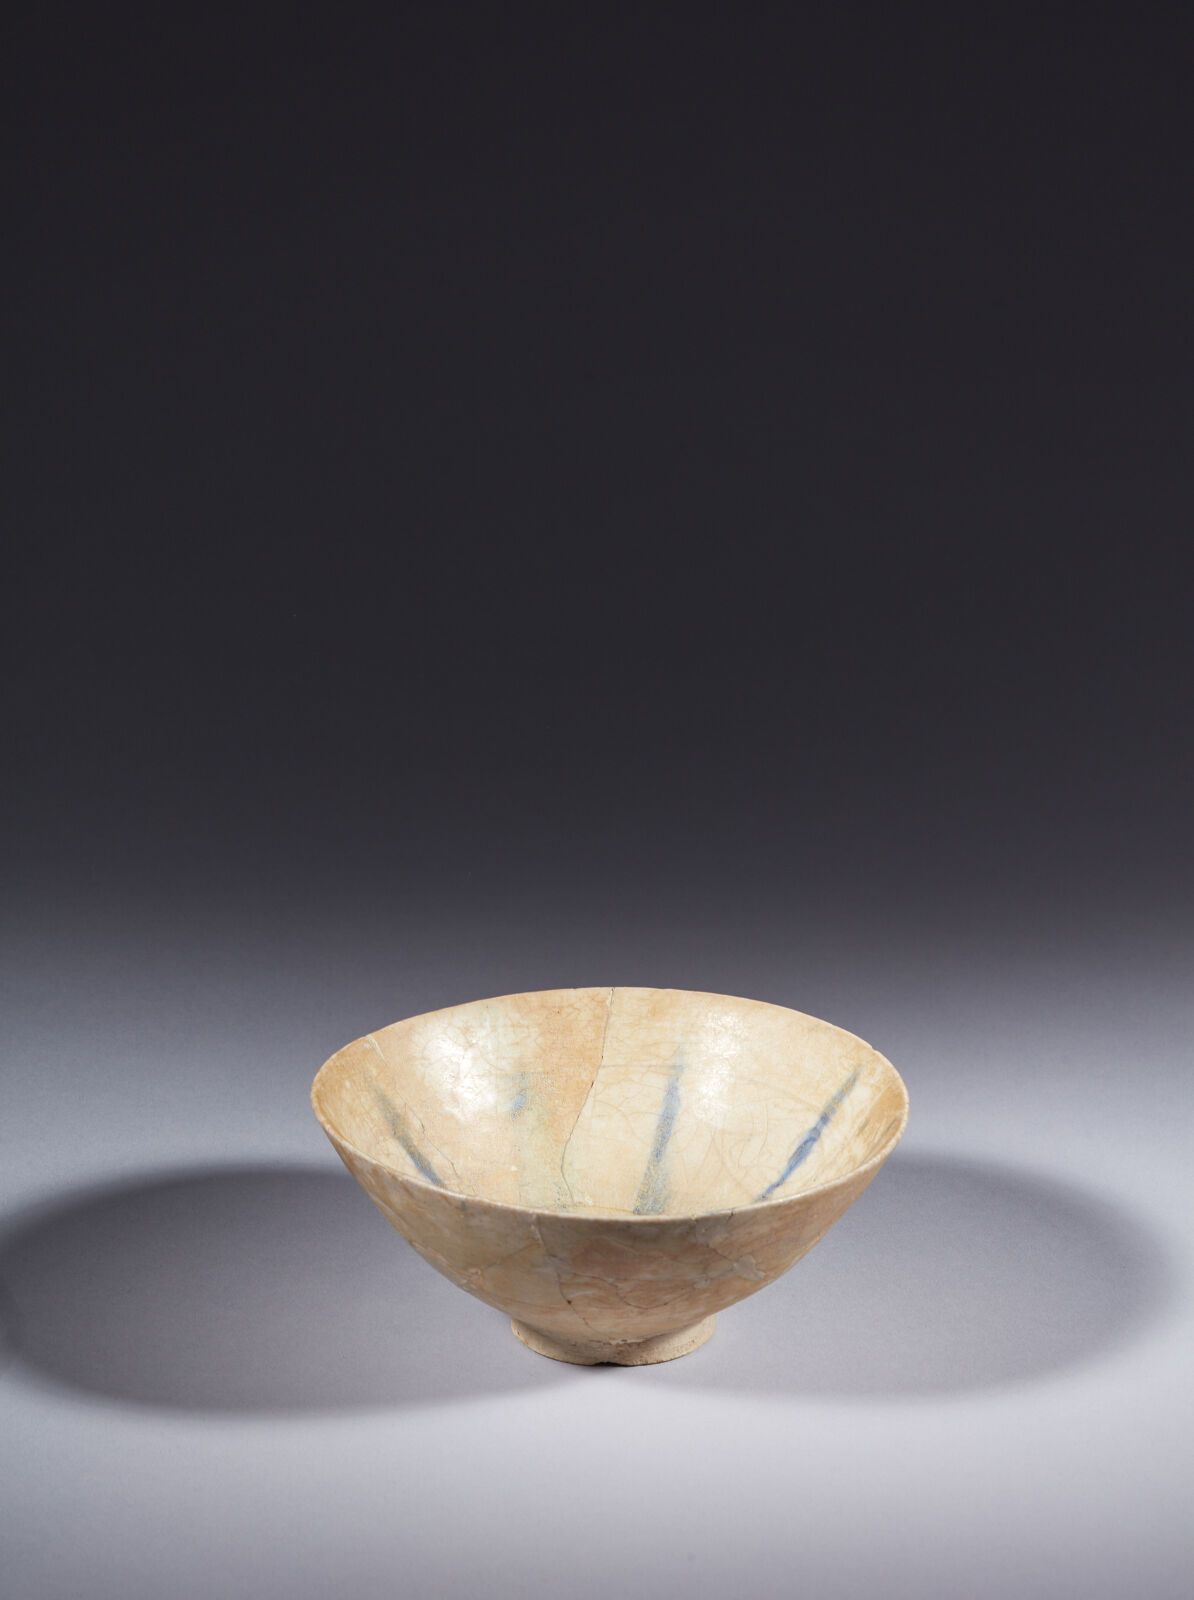 Null IRAN, 12th-13th centuries
Small siliceous ceramic bowl with rounded sides, &hellip;